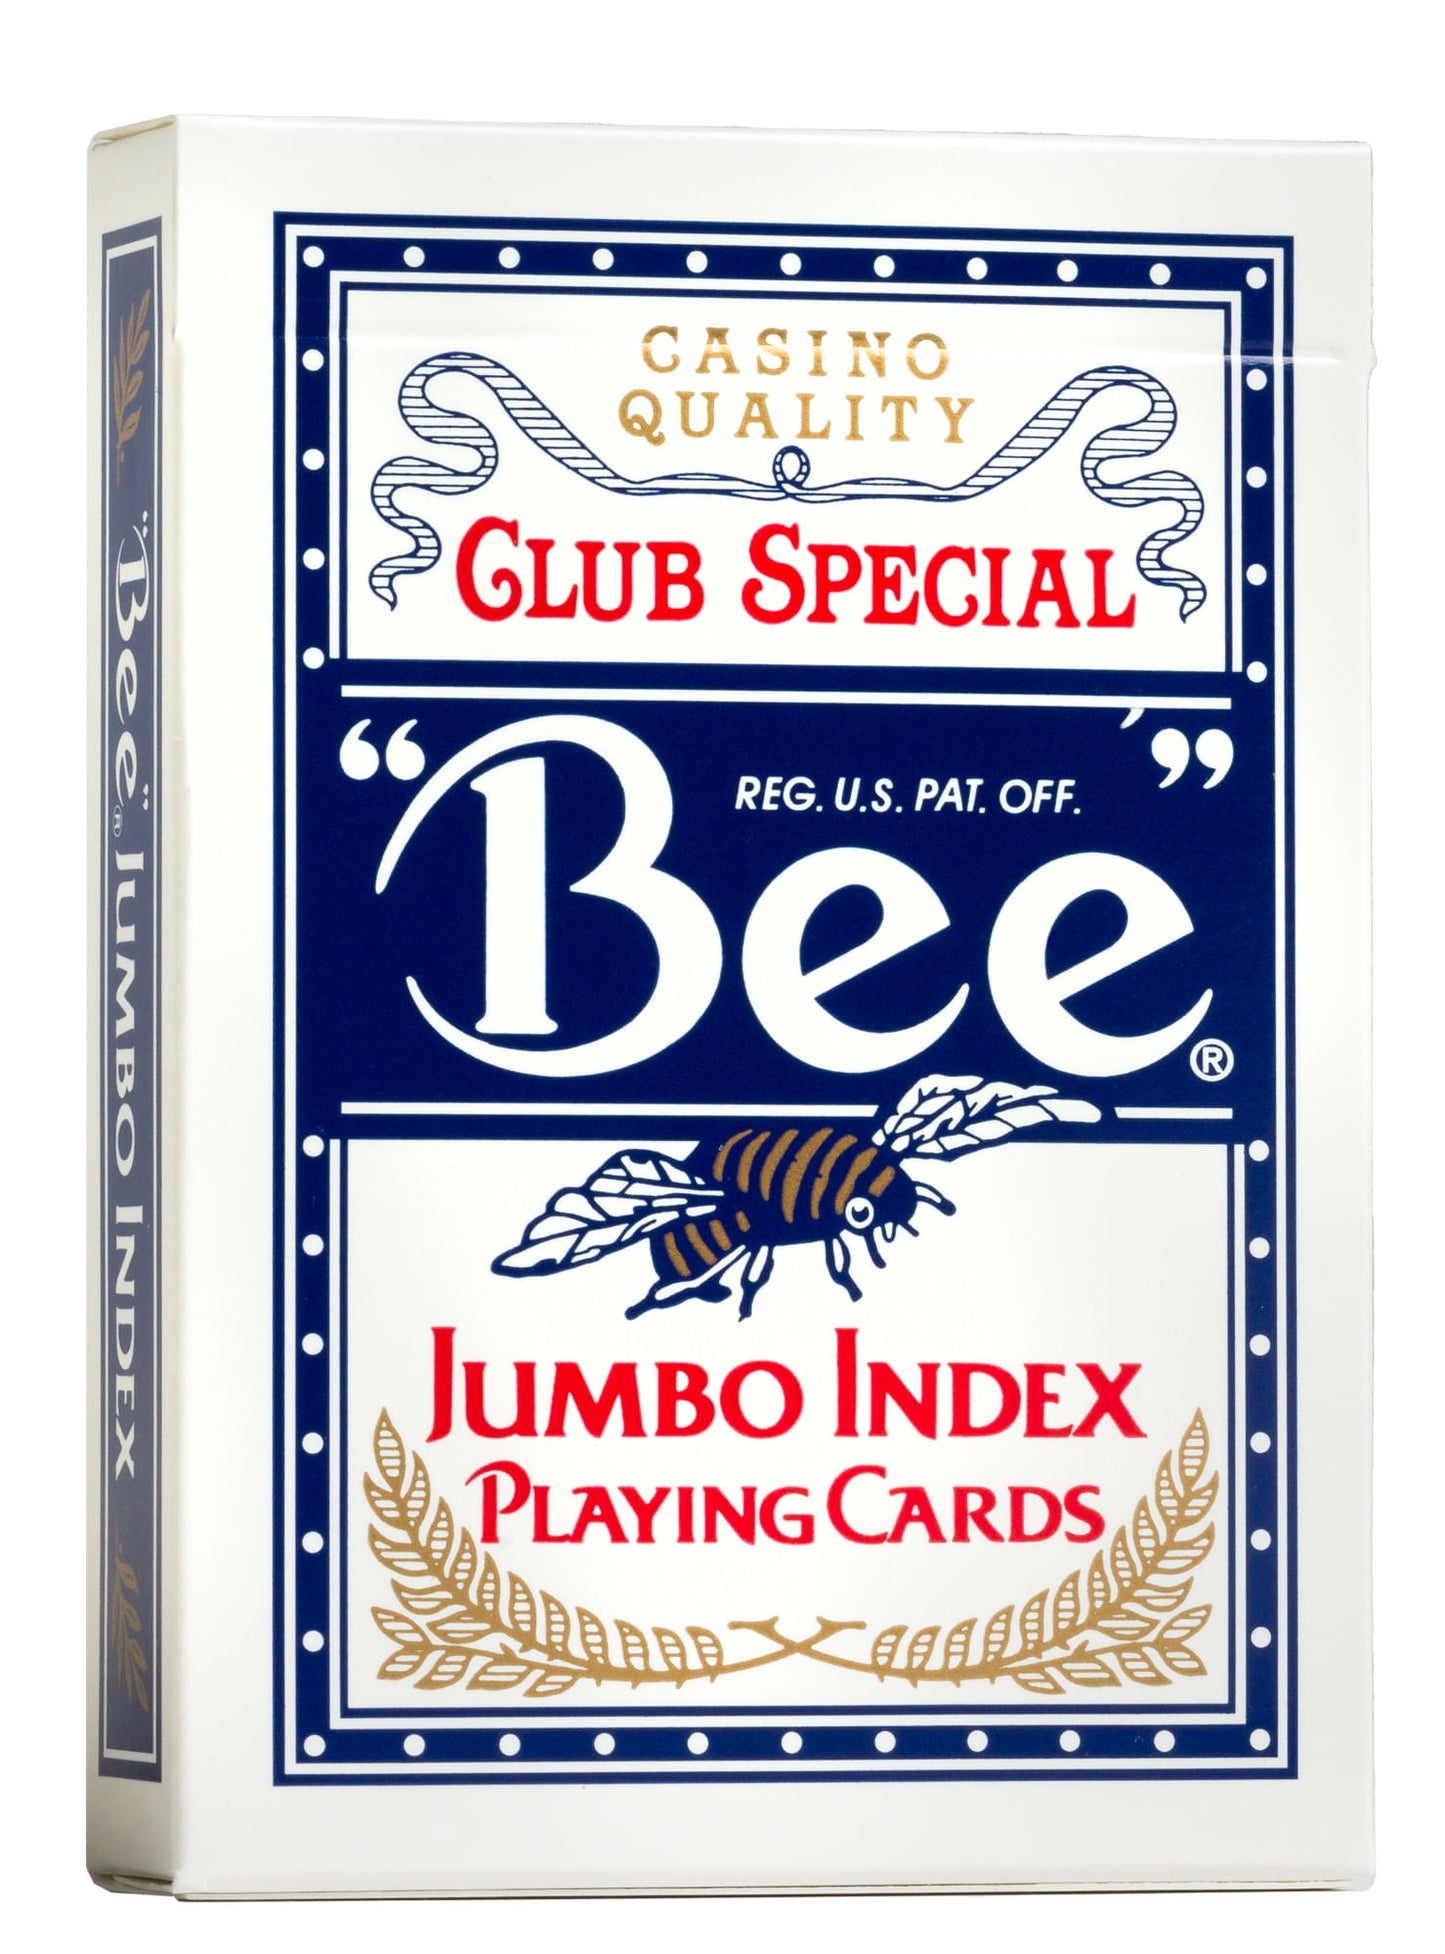 Barcode Marked Cards - Blue BEE JUMBO. These cards have invisible barcodes for poker analyzers, distinct from UV-luminous marks. They suit various poker games like Texas Hold'em and OMAHA. Bee playing cards are high-quality and durable. To use them, you need a poker scanner camera and analyzer. MrGamblemiami.com offers premium Bee marked barcode decks, including US BEE regular and Jumbo index BEE cards